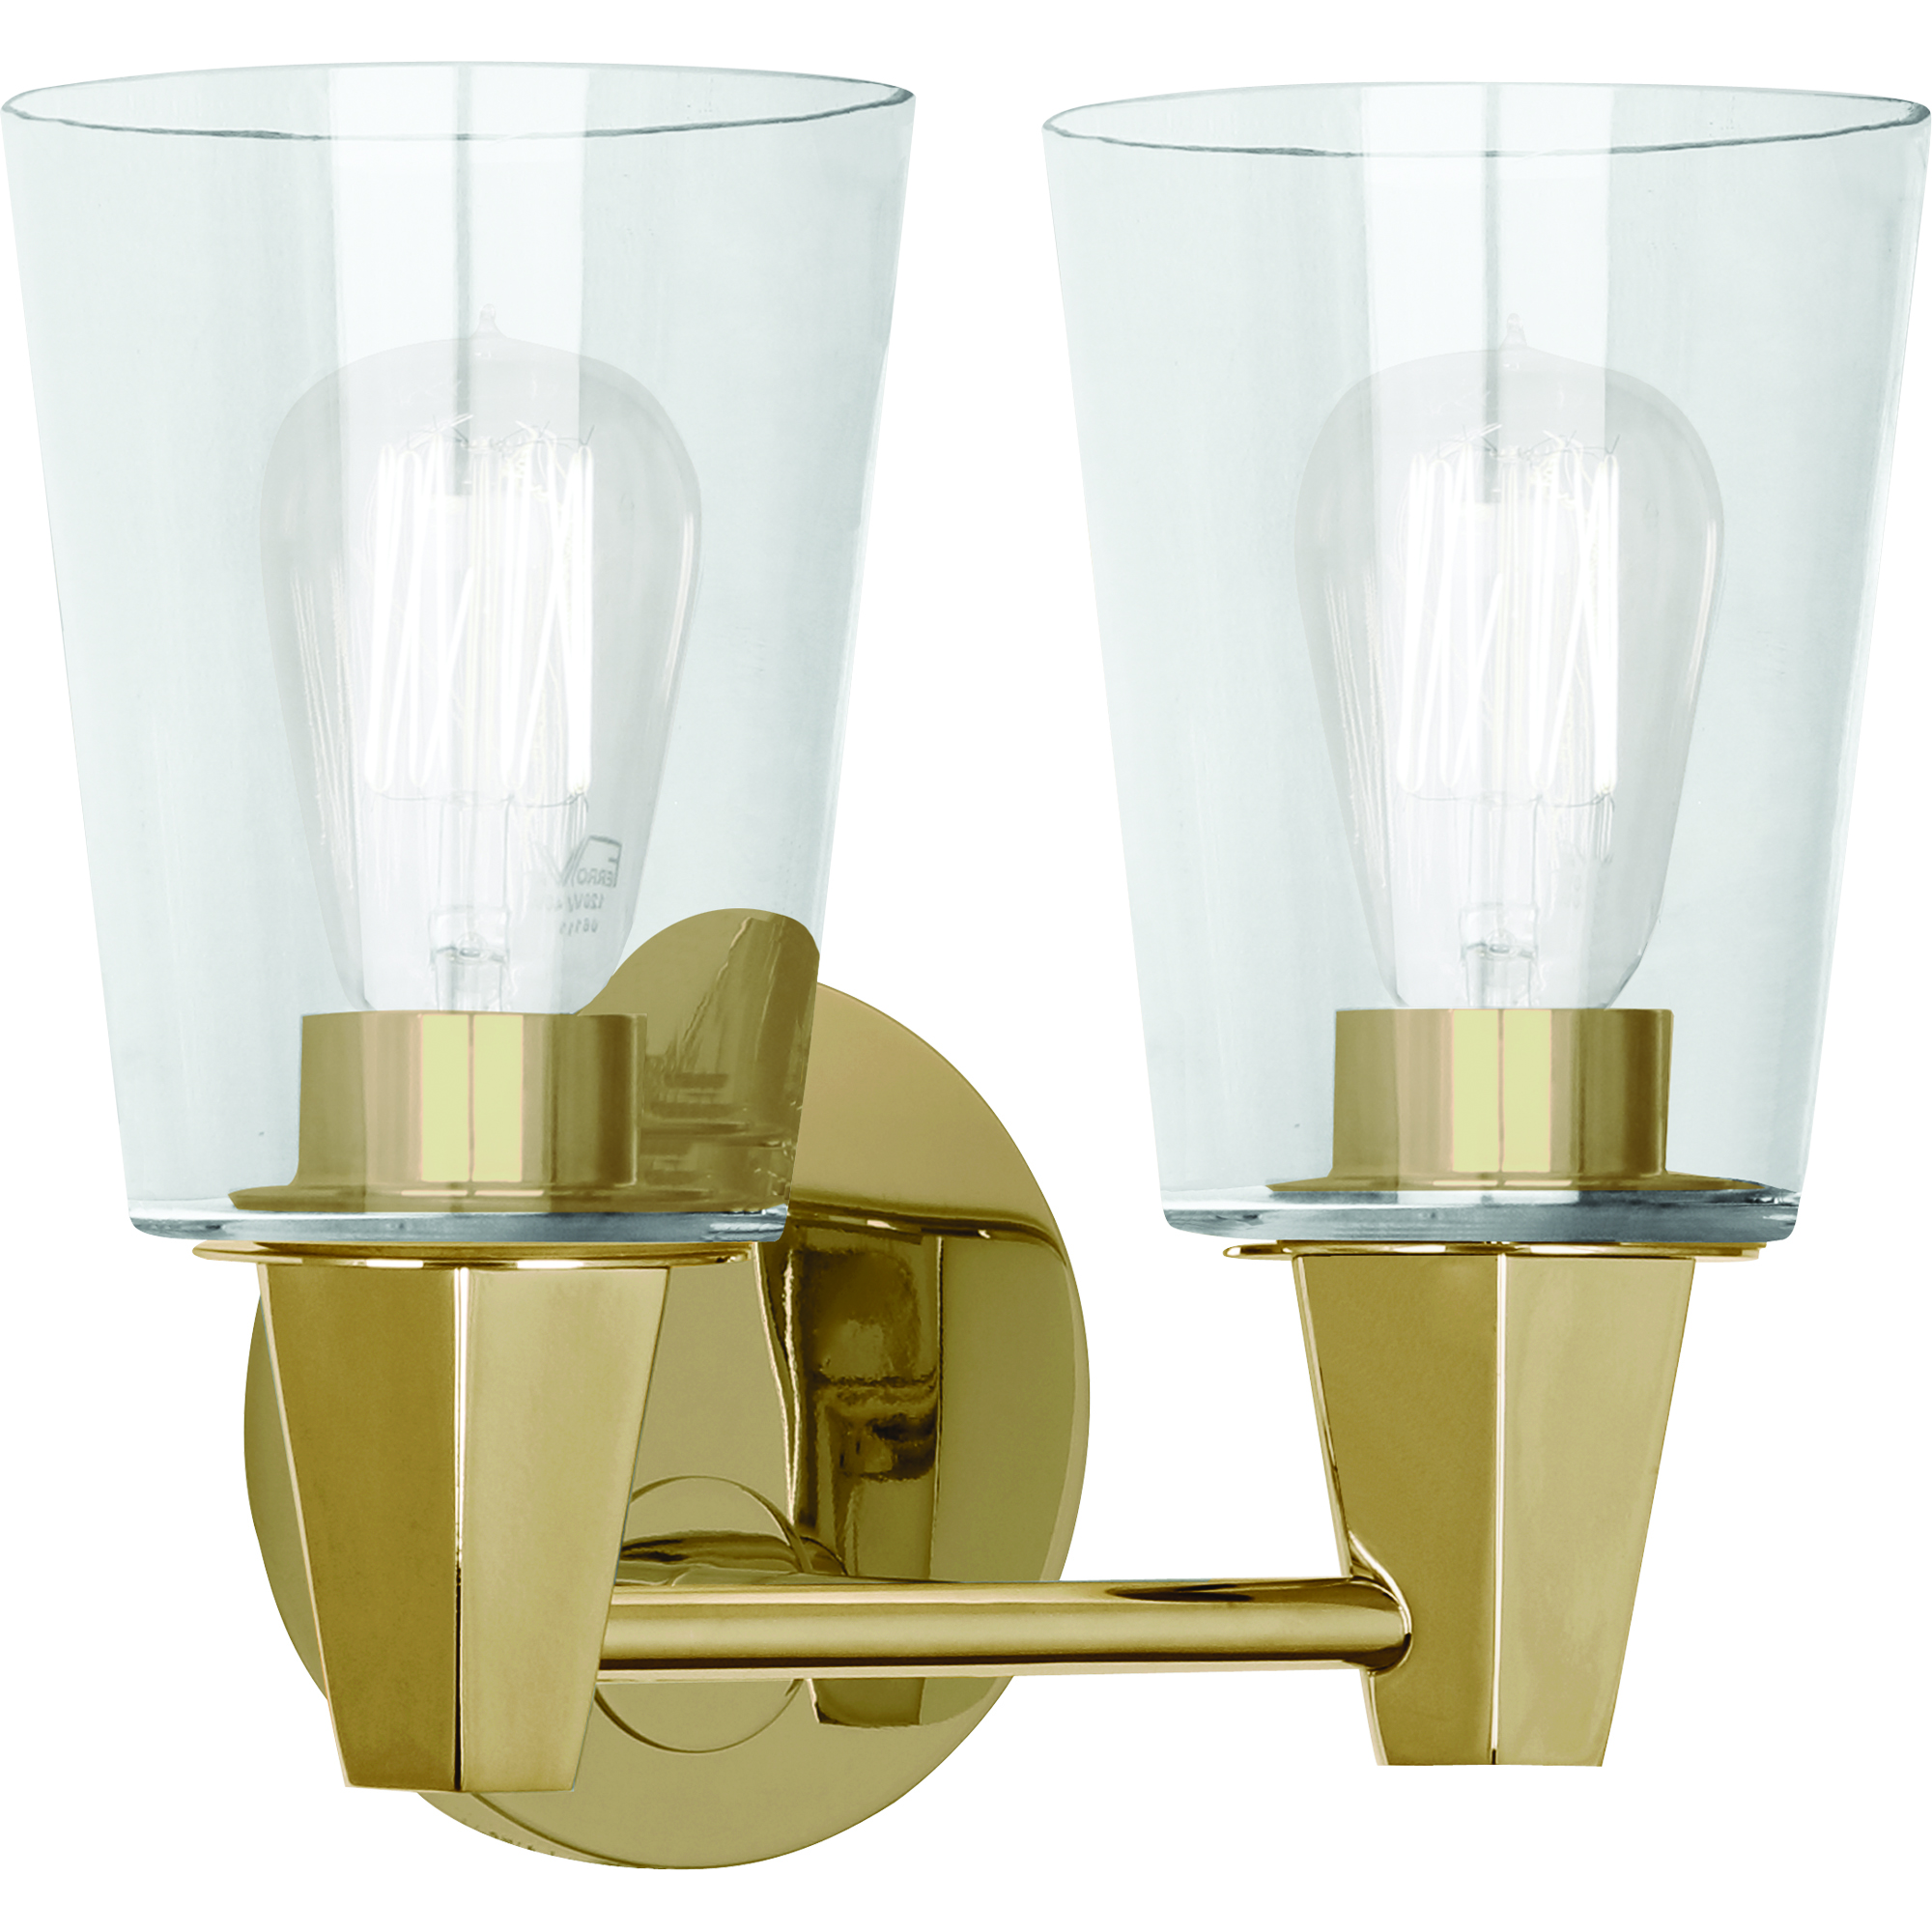 Wheatley Wall Sconce Style #255C